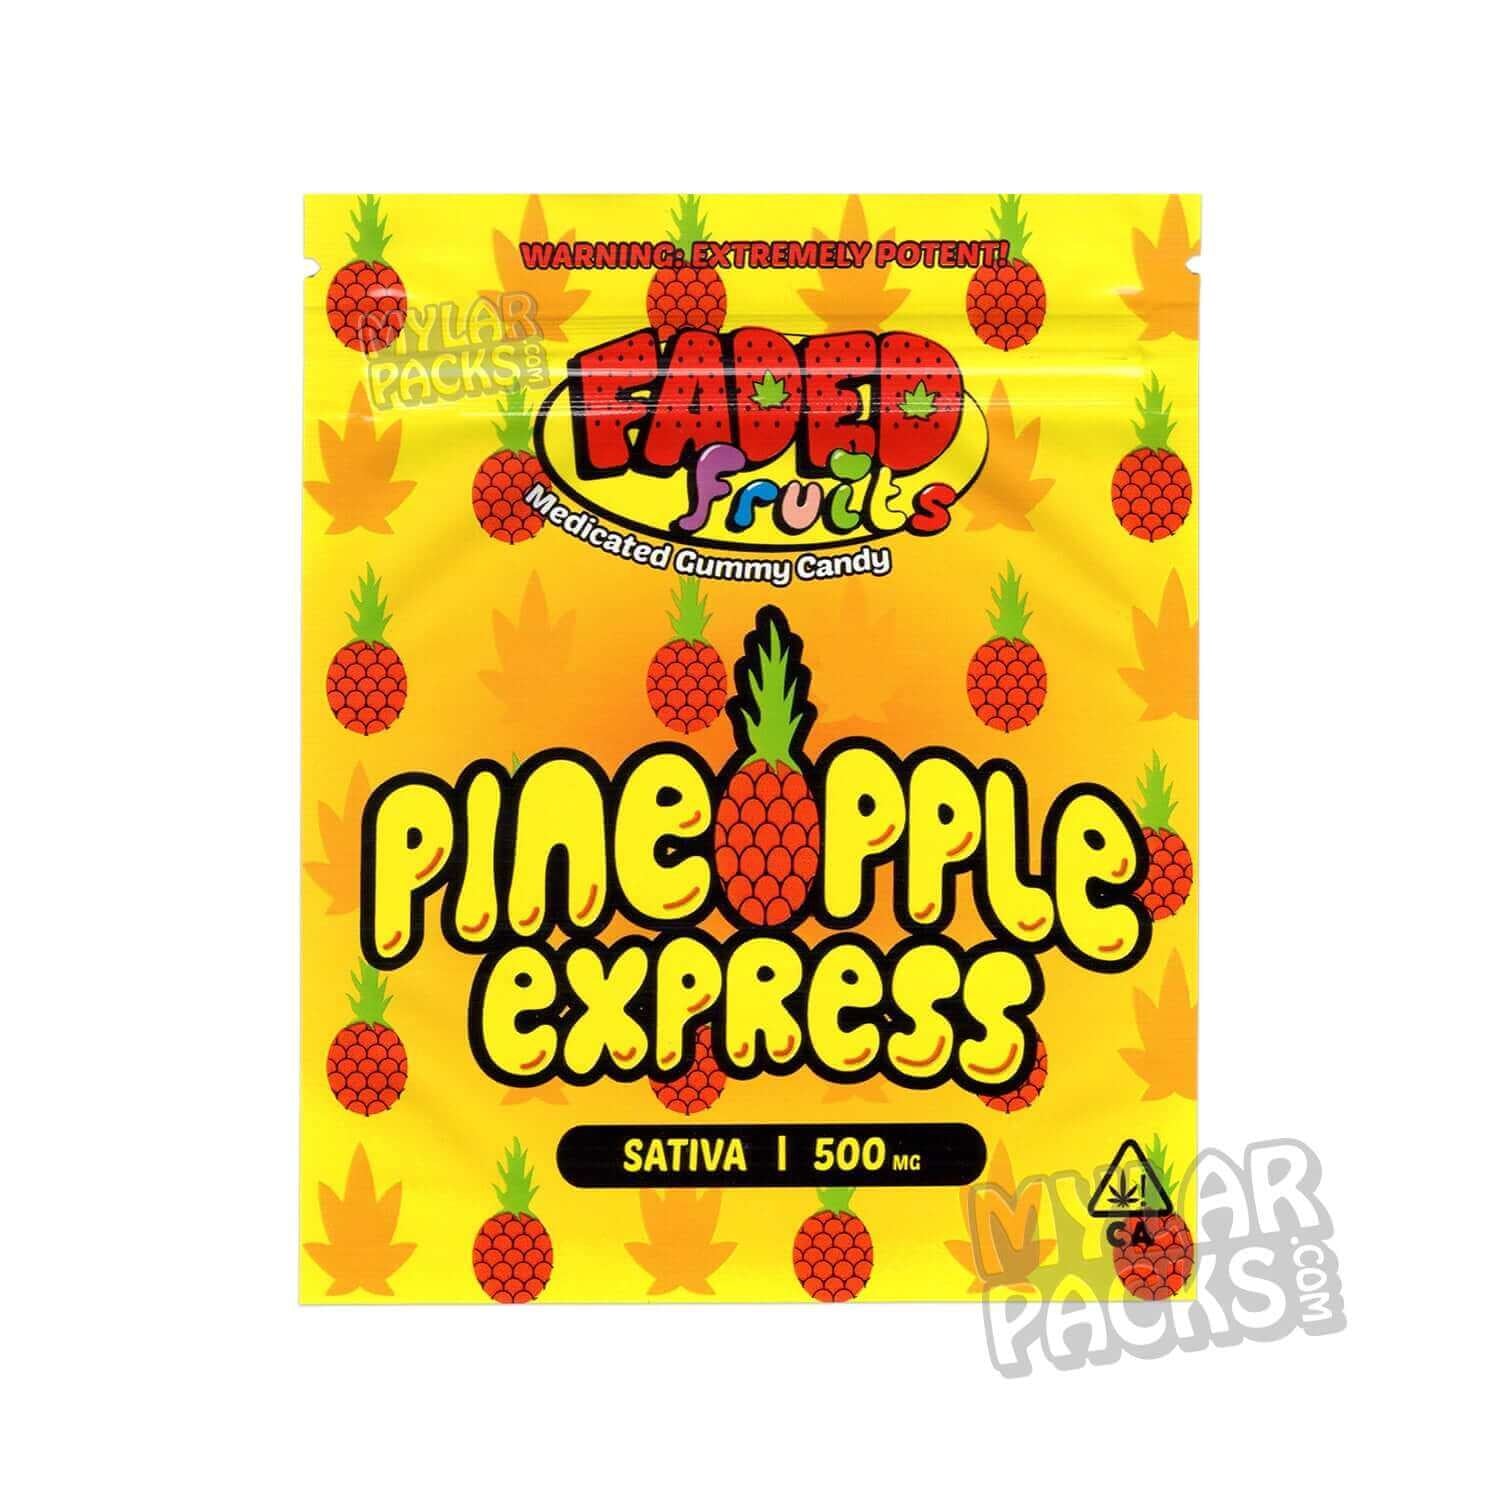 Faded Fruits Pineapple Express 500mg Empty Edibles Mylar Packaging Bag Mylar Master 4276